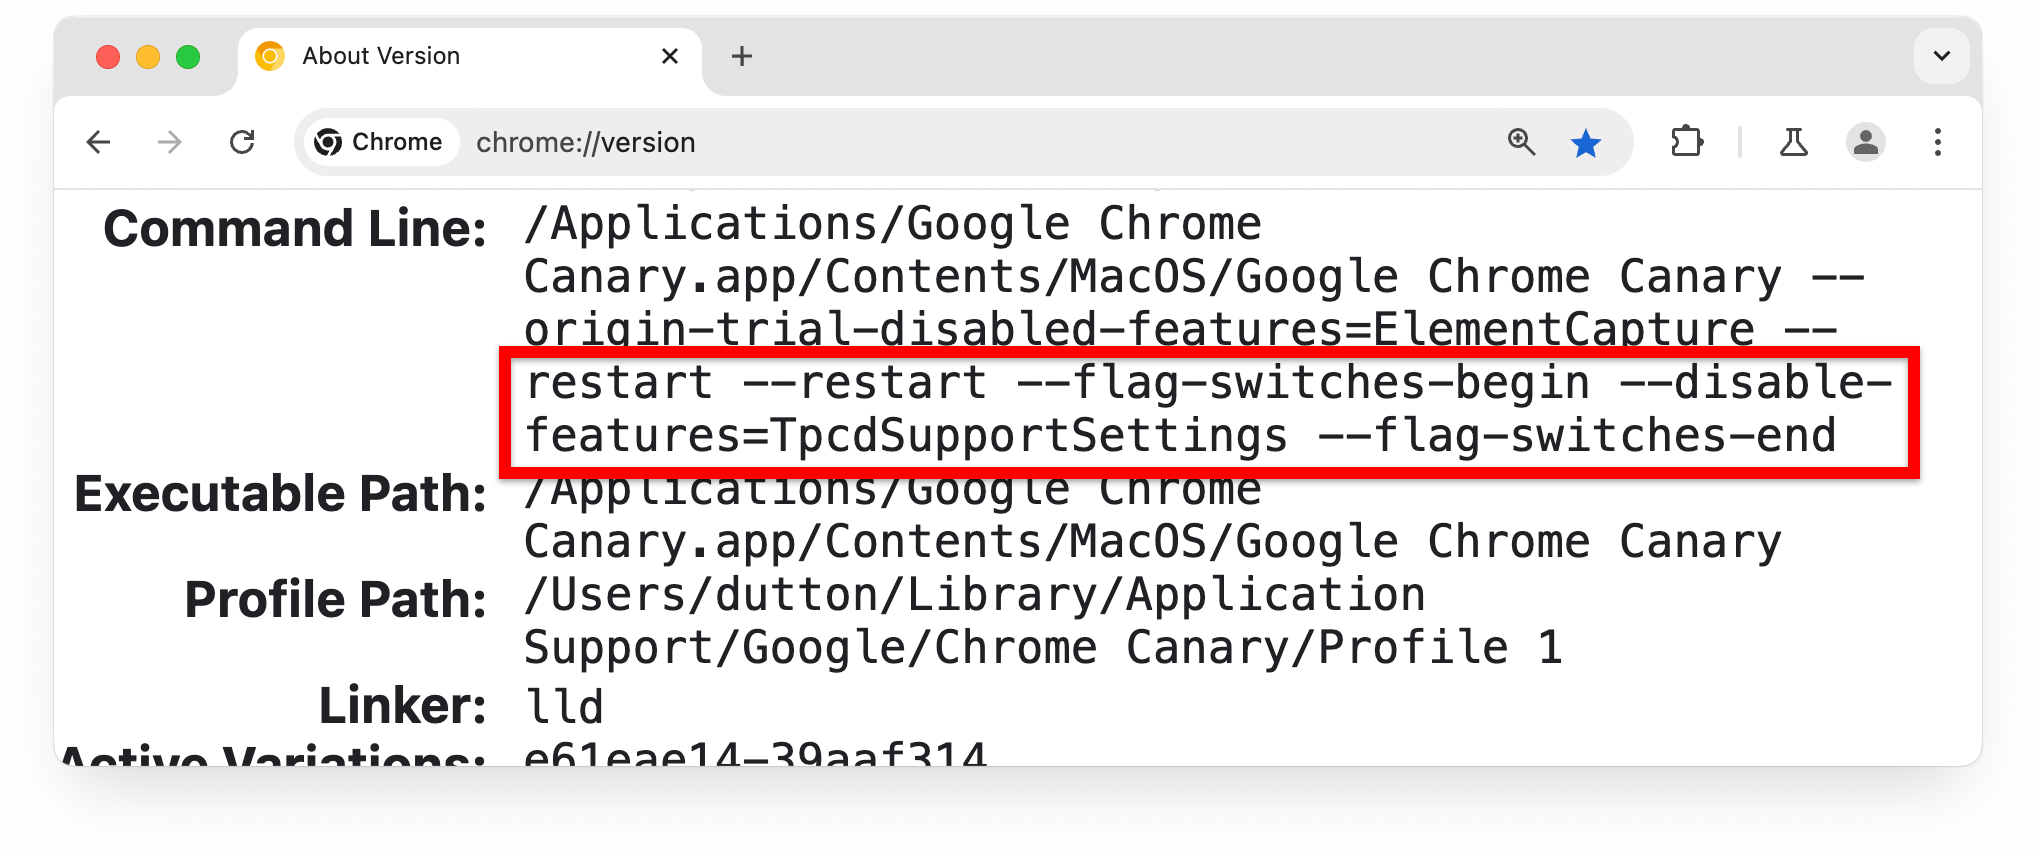 chrome://version page with a flag in the Command Line section highlighted